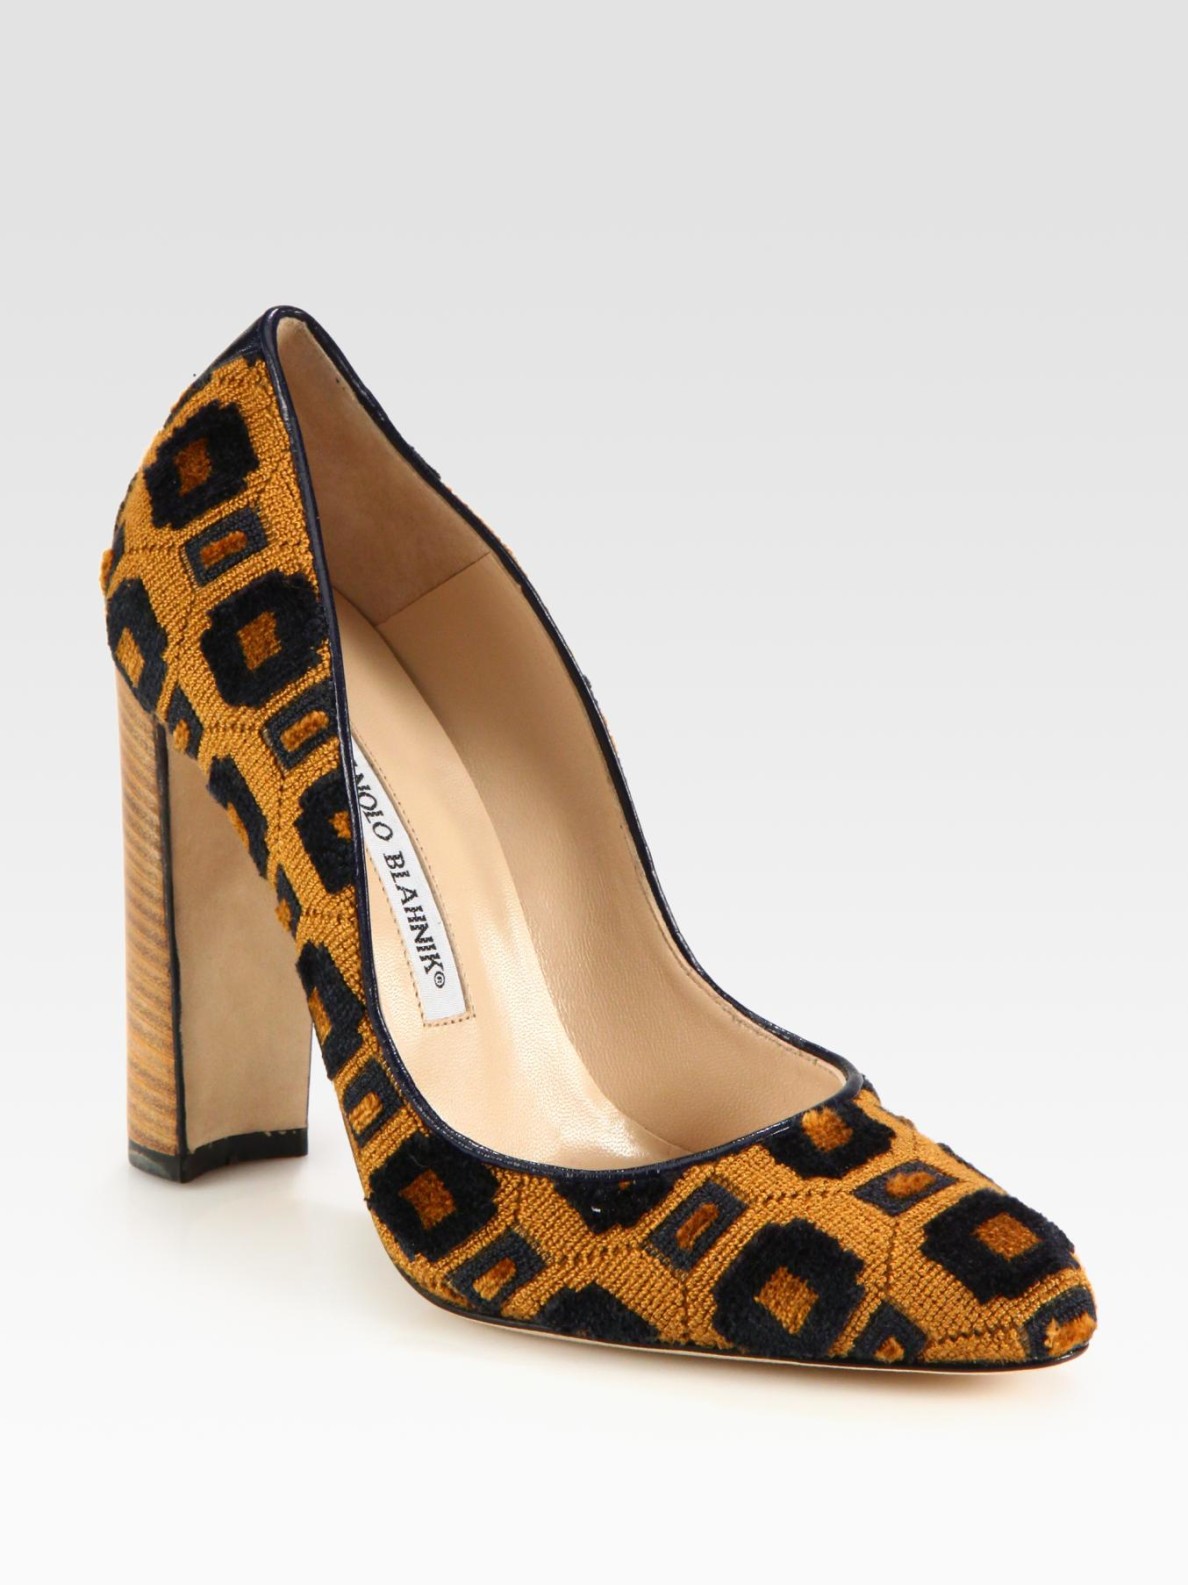 Lyst - Manolo Blahnik Tapestry and Leather Pumps in Brown